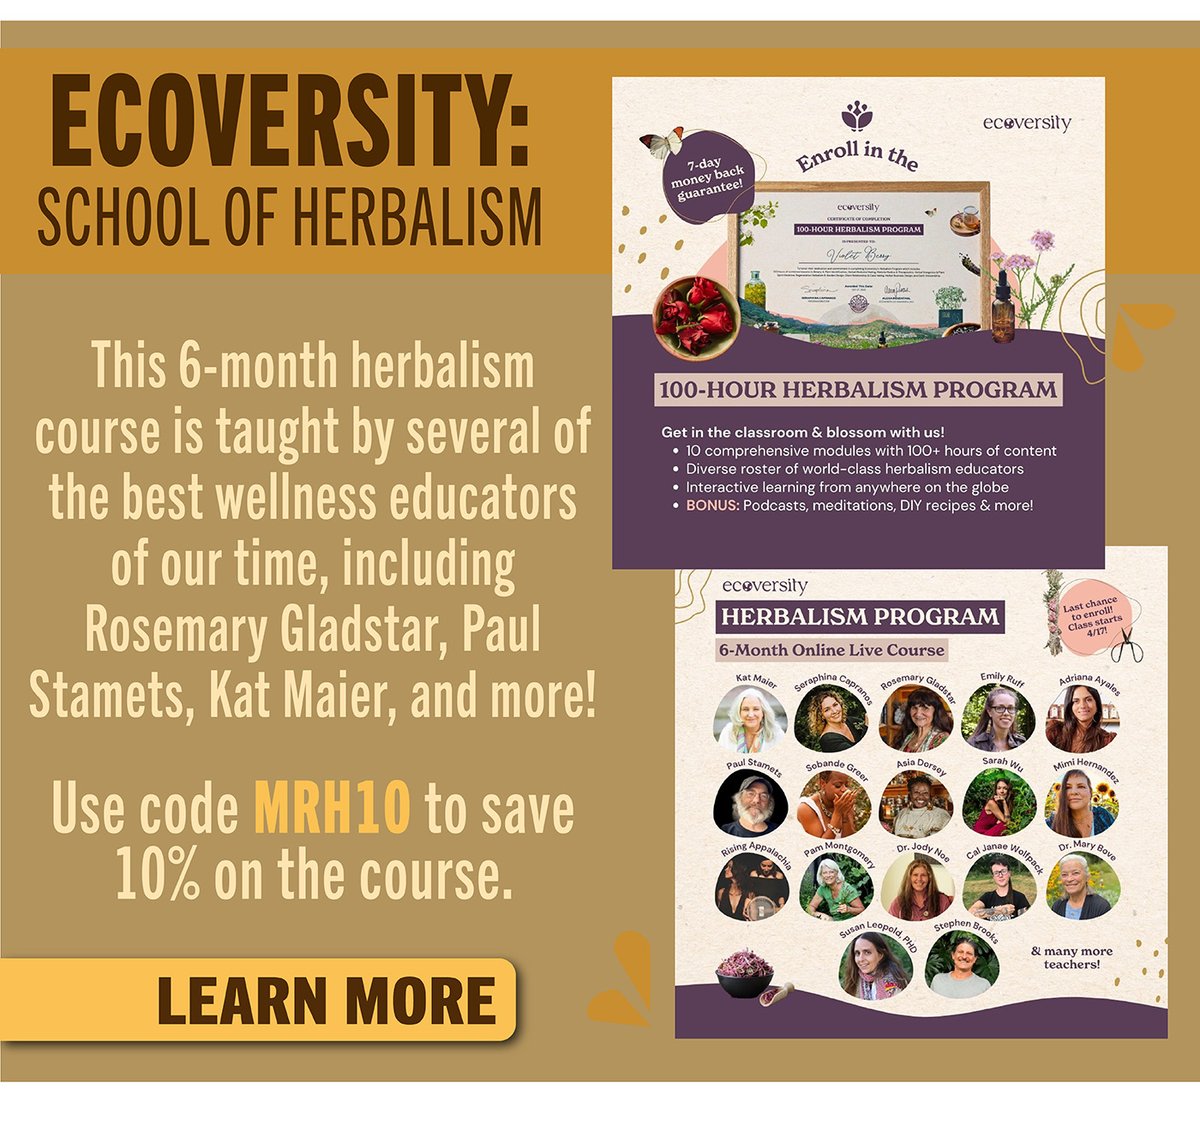 Ecoversity: Learn More About This 6-Month herbal Course 